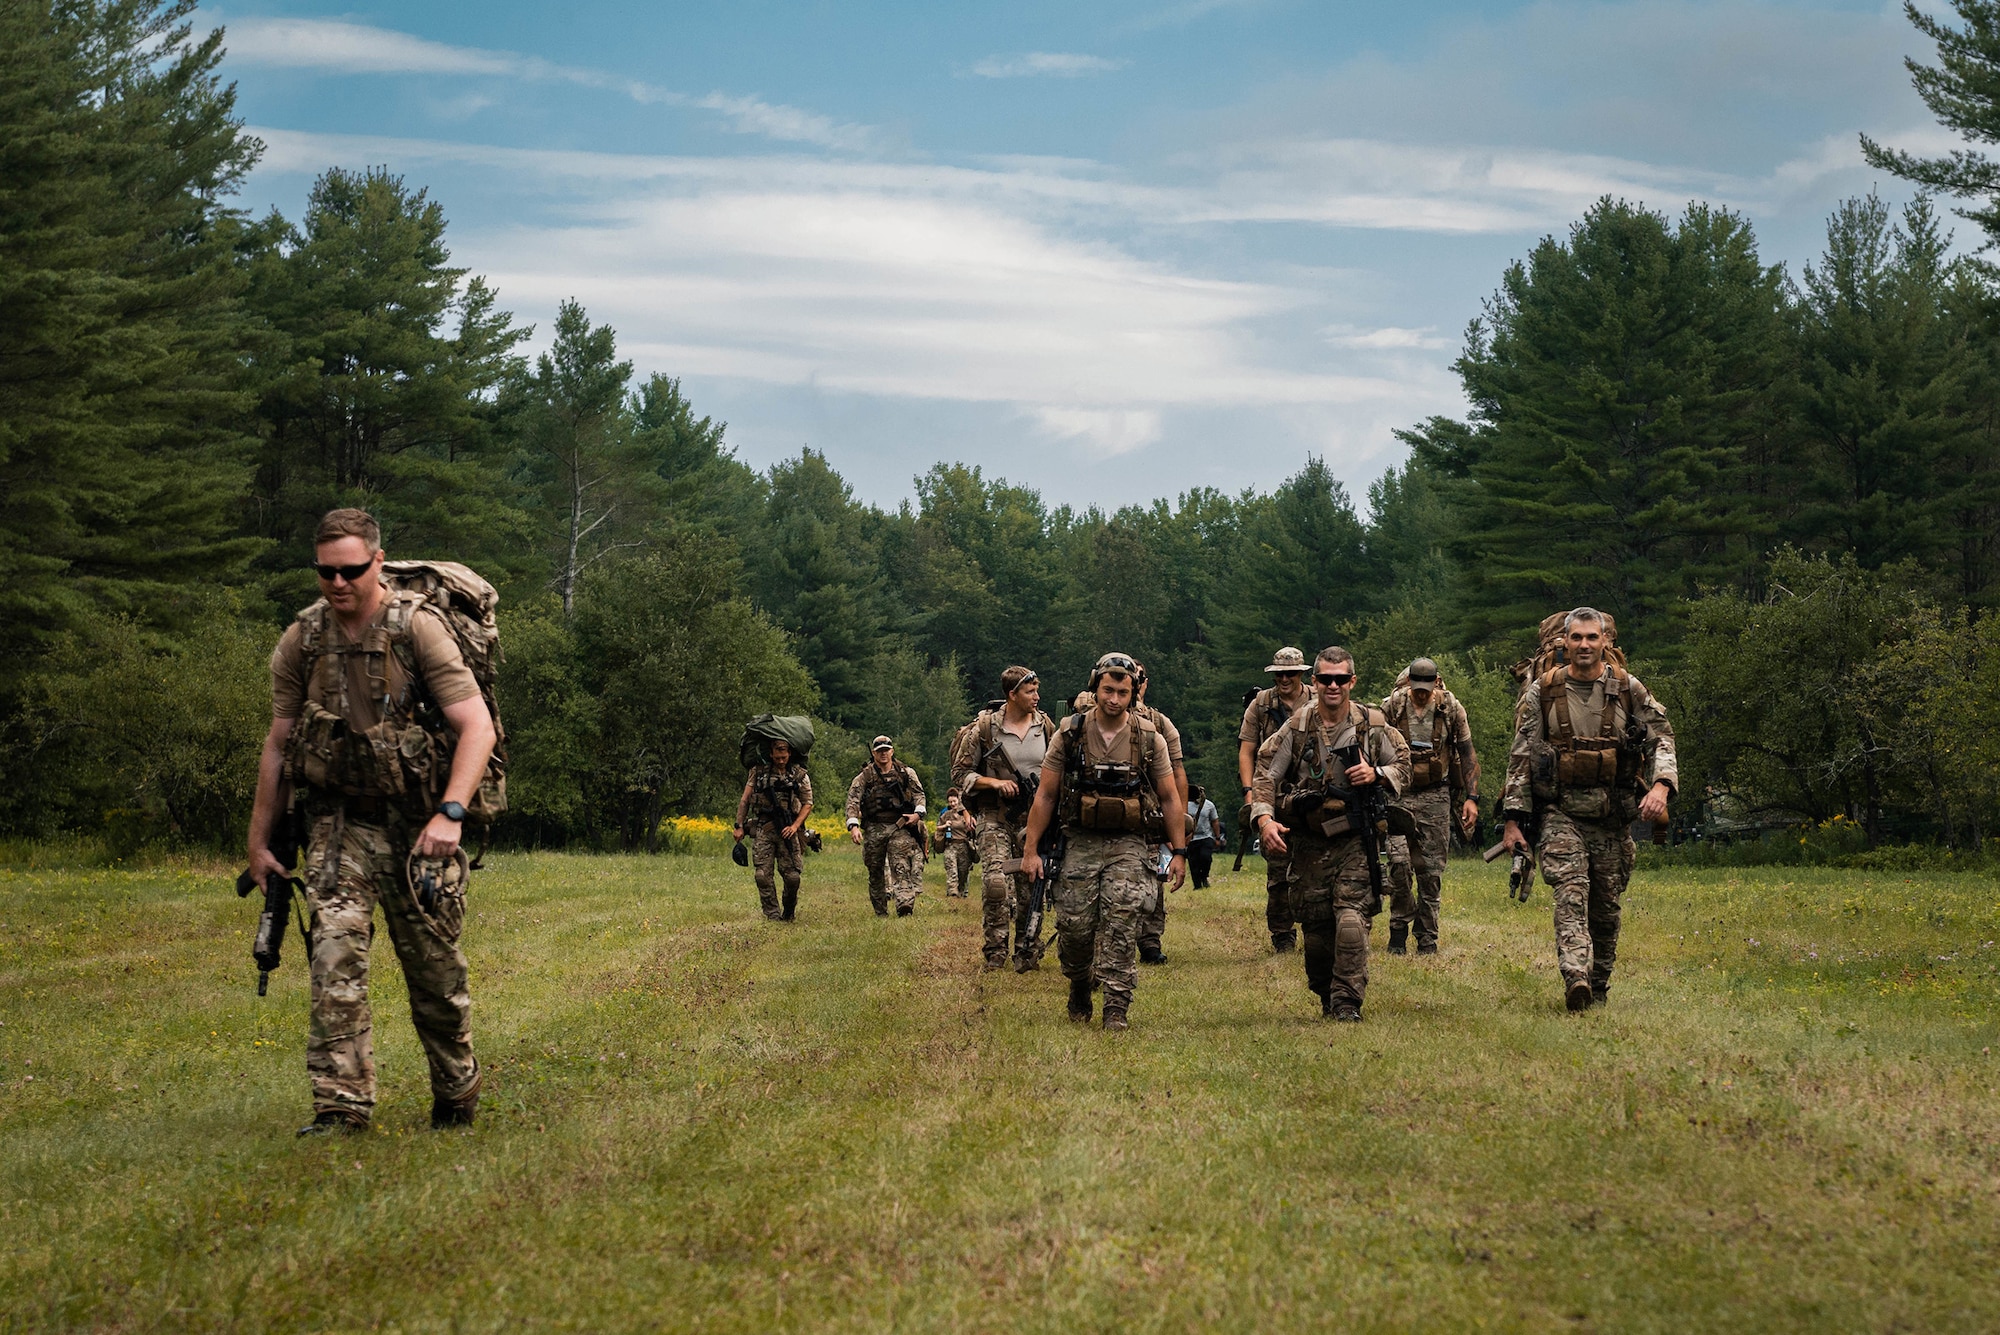 Airmen assigned to the New York Air National Guard’s 274th Air Support Operations Squadron based in Syracuse, part of the 107th Attack Wing, hike to a designated landing zone during a tactical air control party (TACP) training procedure in Upstate N.Y., Aug. 6, 2022.